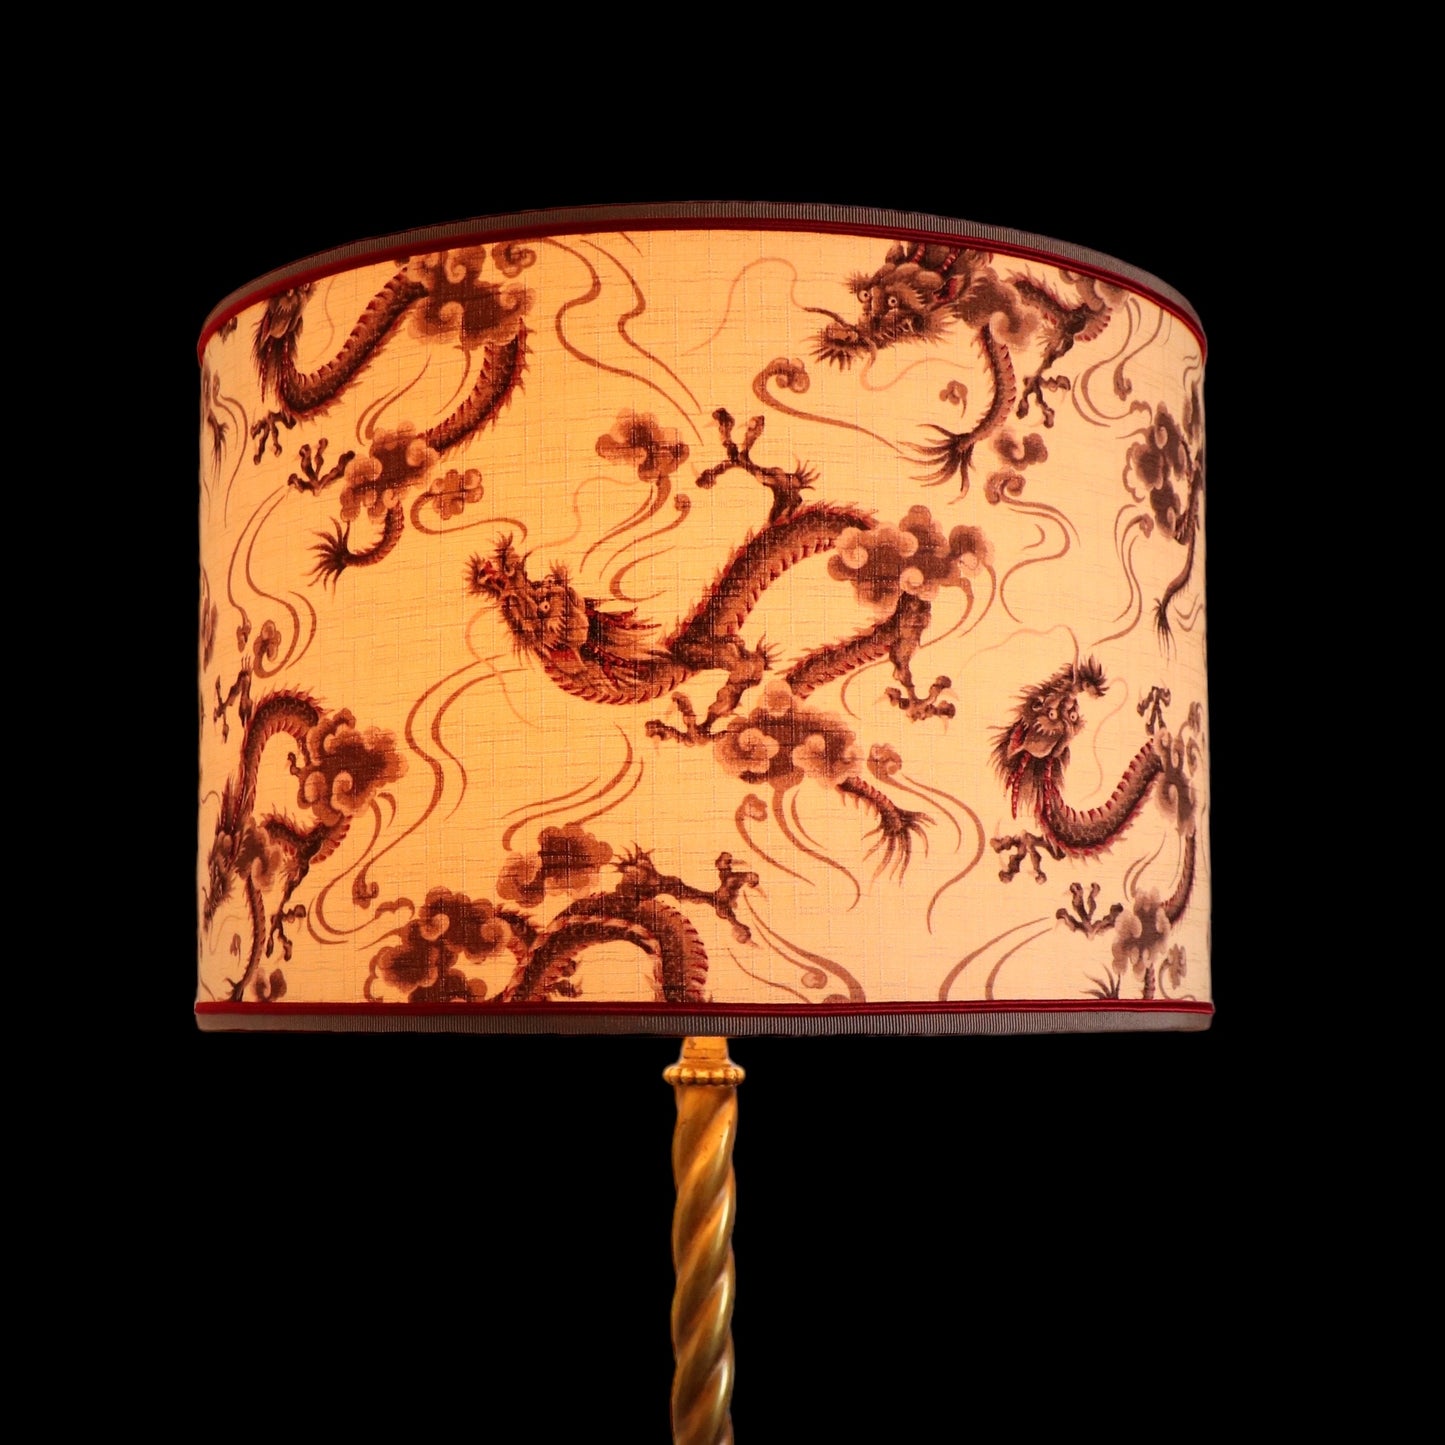 DRAGONS lampshade laminated in Japanese fabric, ref D3